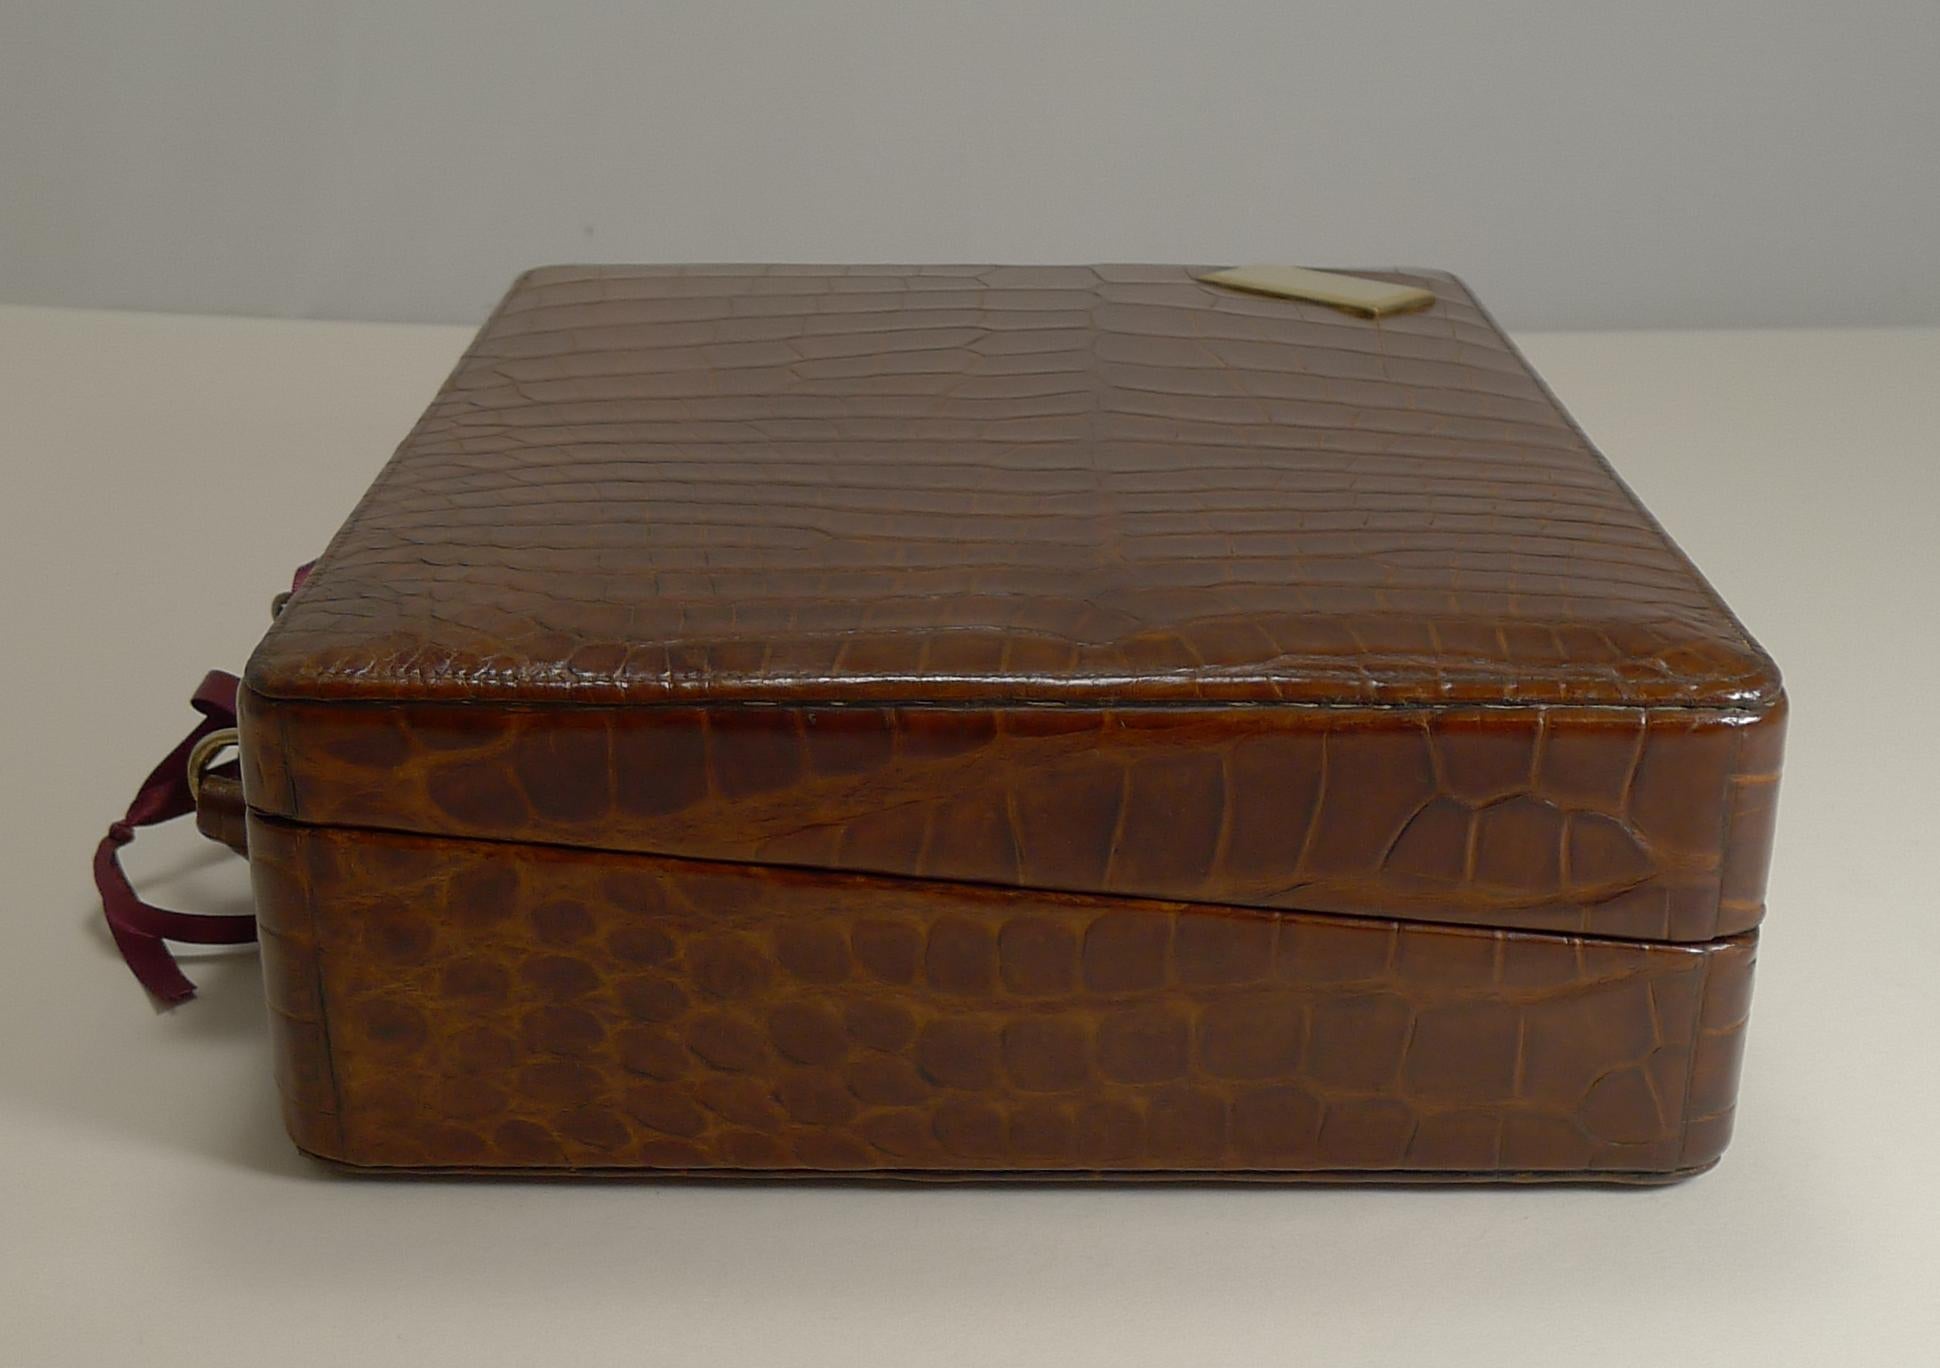 A magnificent late Edwardian jewellery case / box in the form a suitcase covered in rich cognac coloured Crocodile / Alligator skin.

The case has a handle and a polished brass mount, vacant for engraving by your local engraver should you so wish.